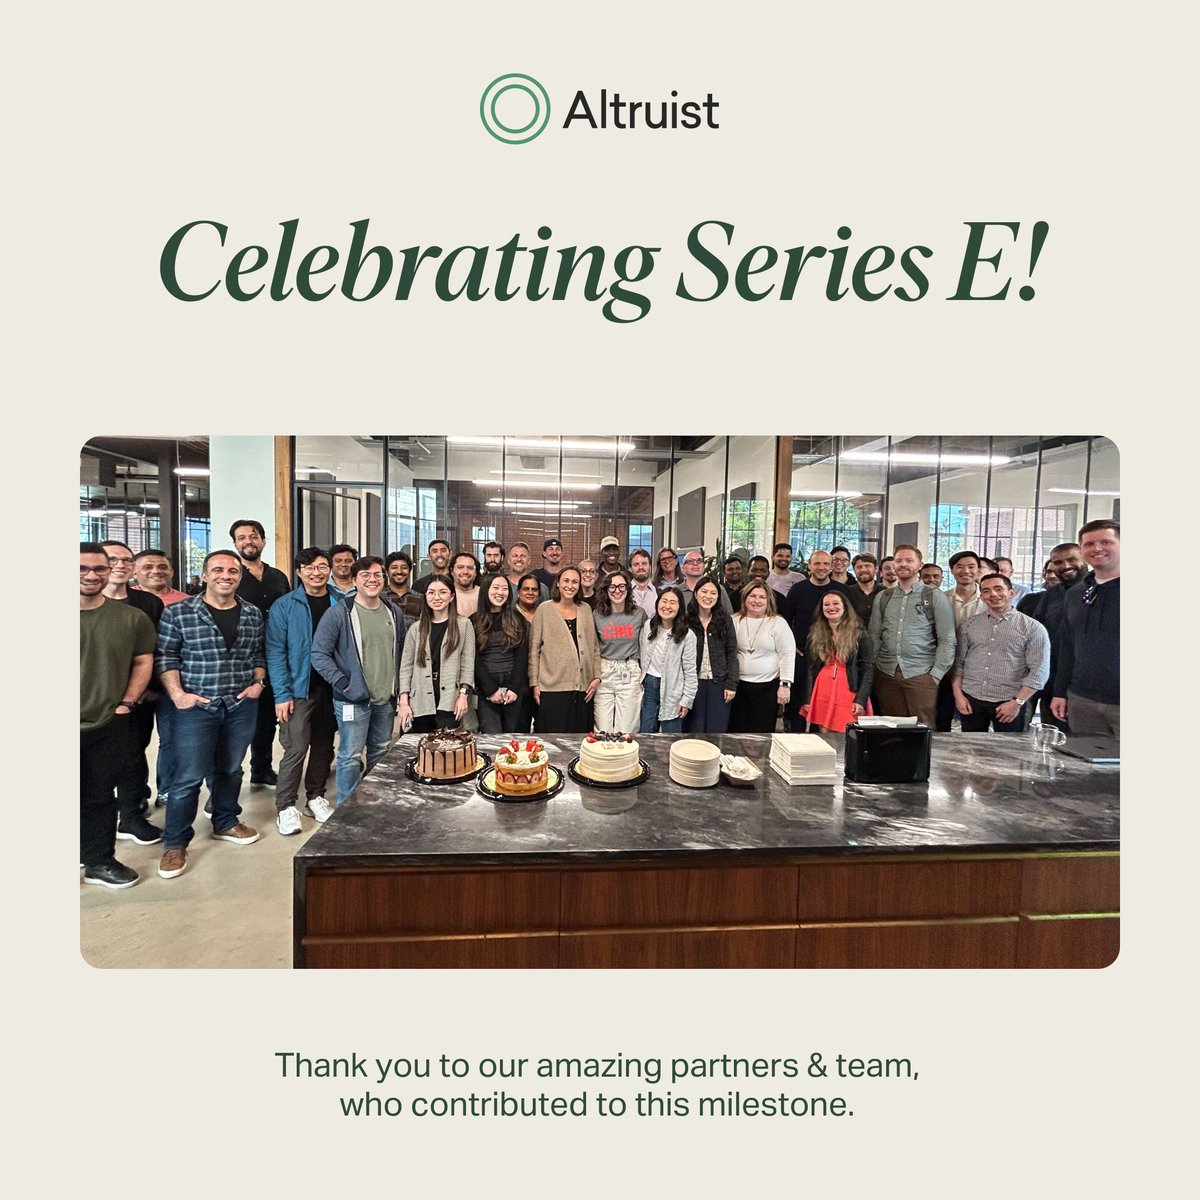 Grateful for the incredible support from our dedicated team, advisors, and investors who made our Series E funding round possible last week. Thank you for believing in our mission and helping us redefine the future of wealth management. More to come!